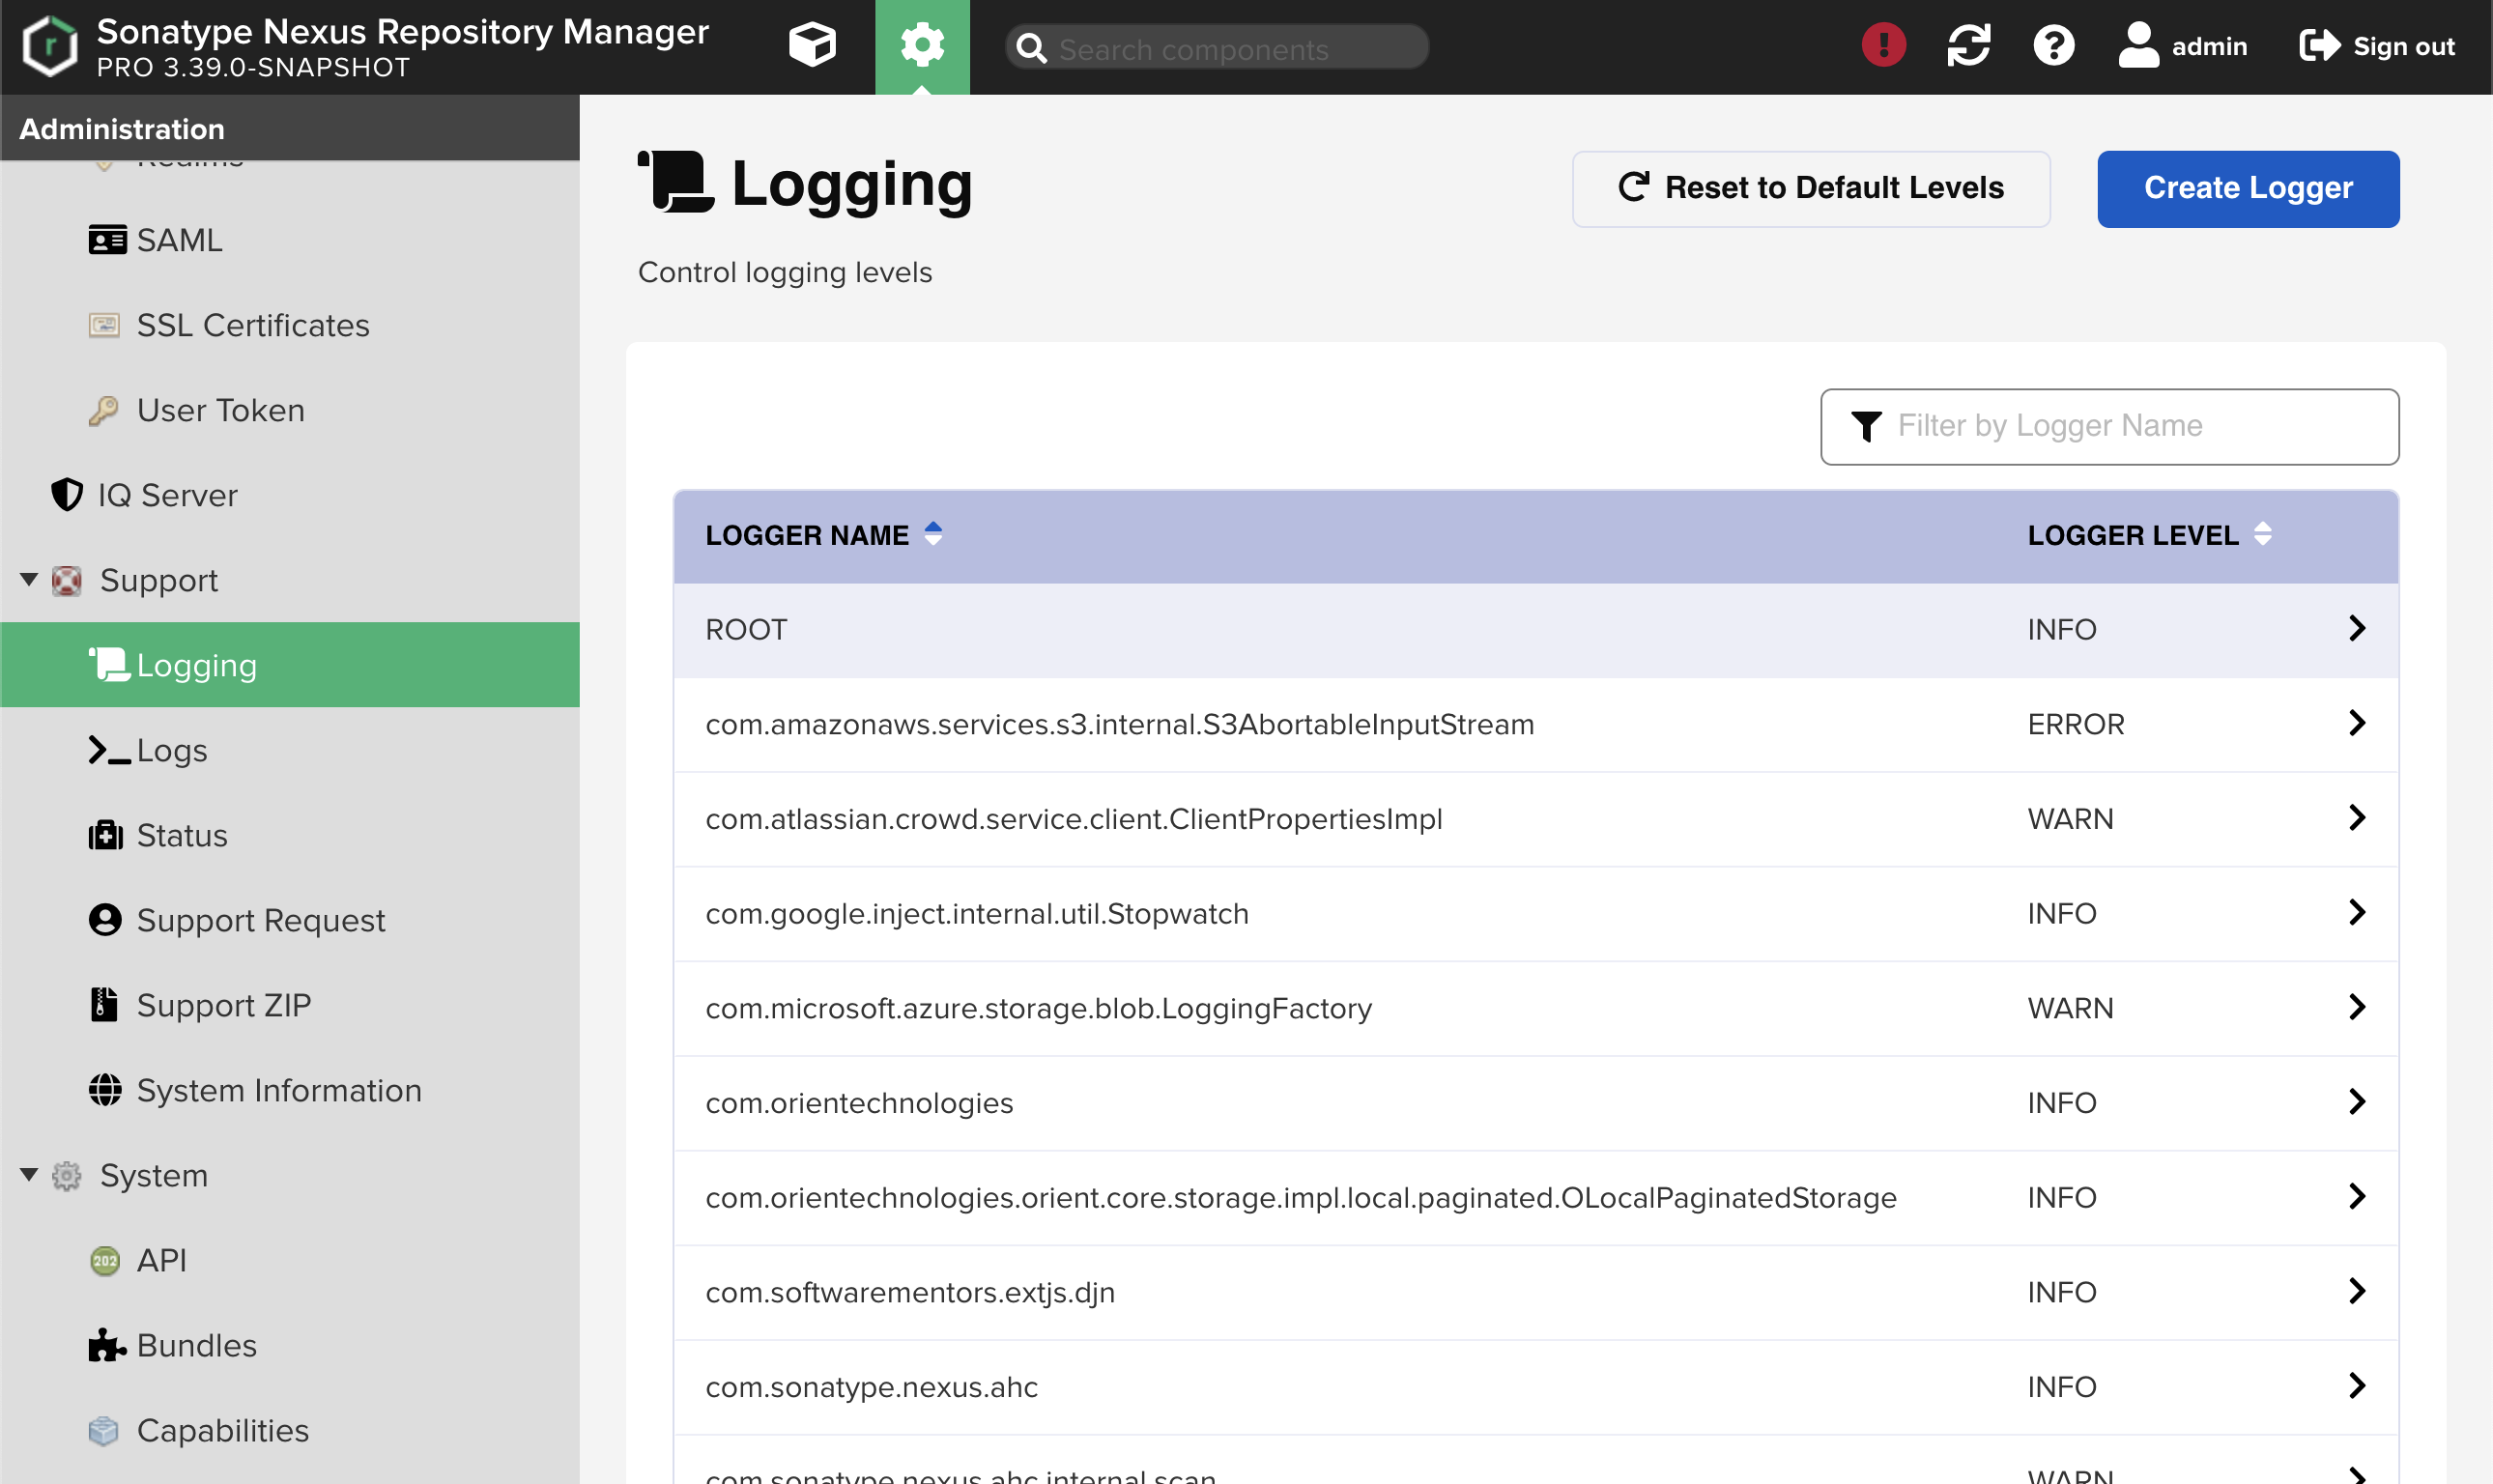 Logging view with table of default loggers